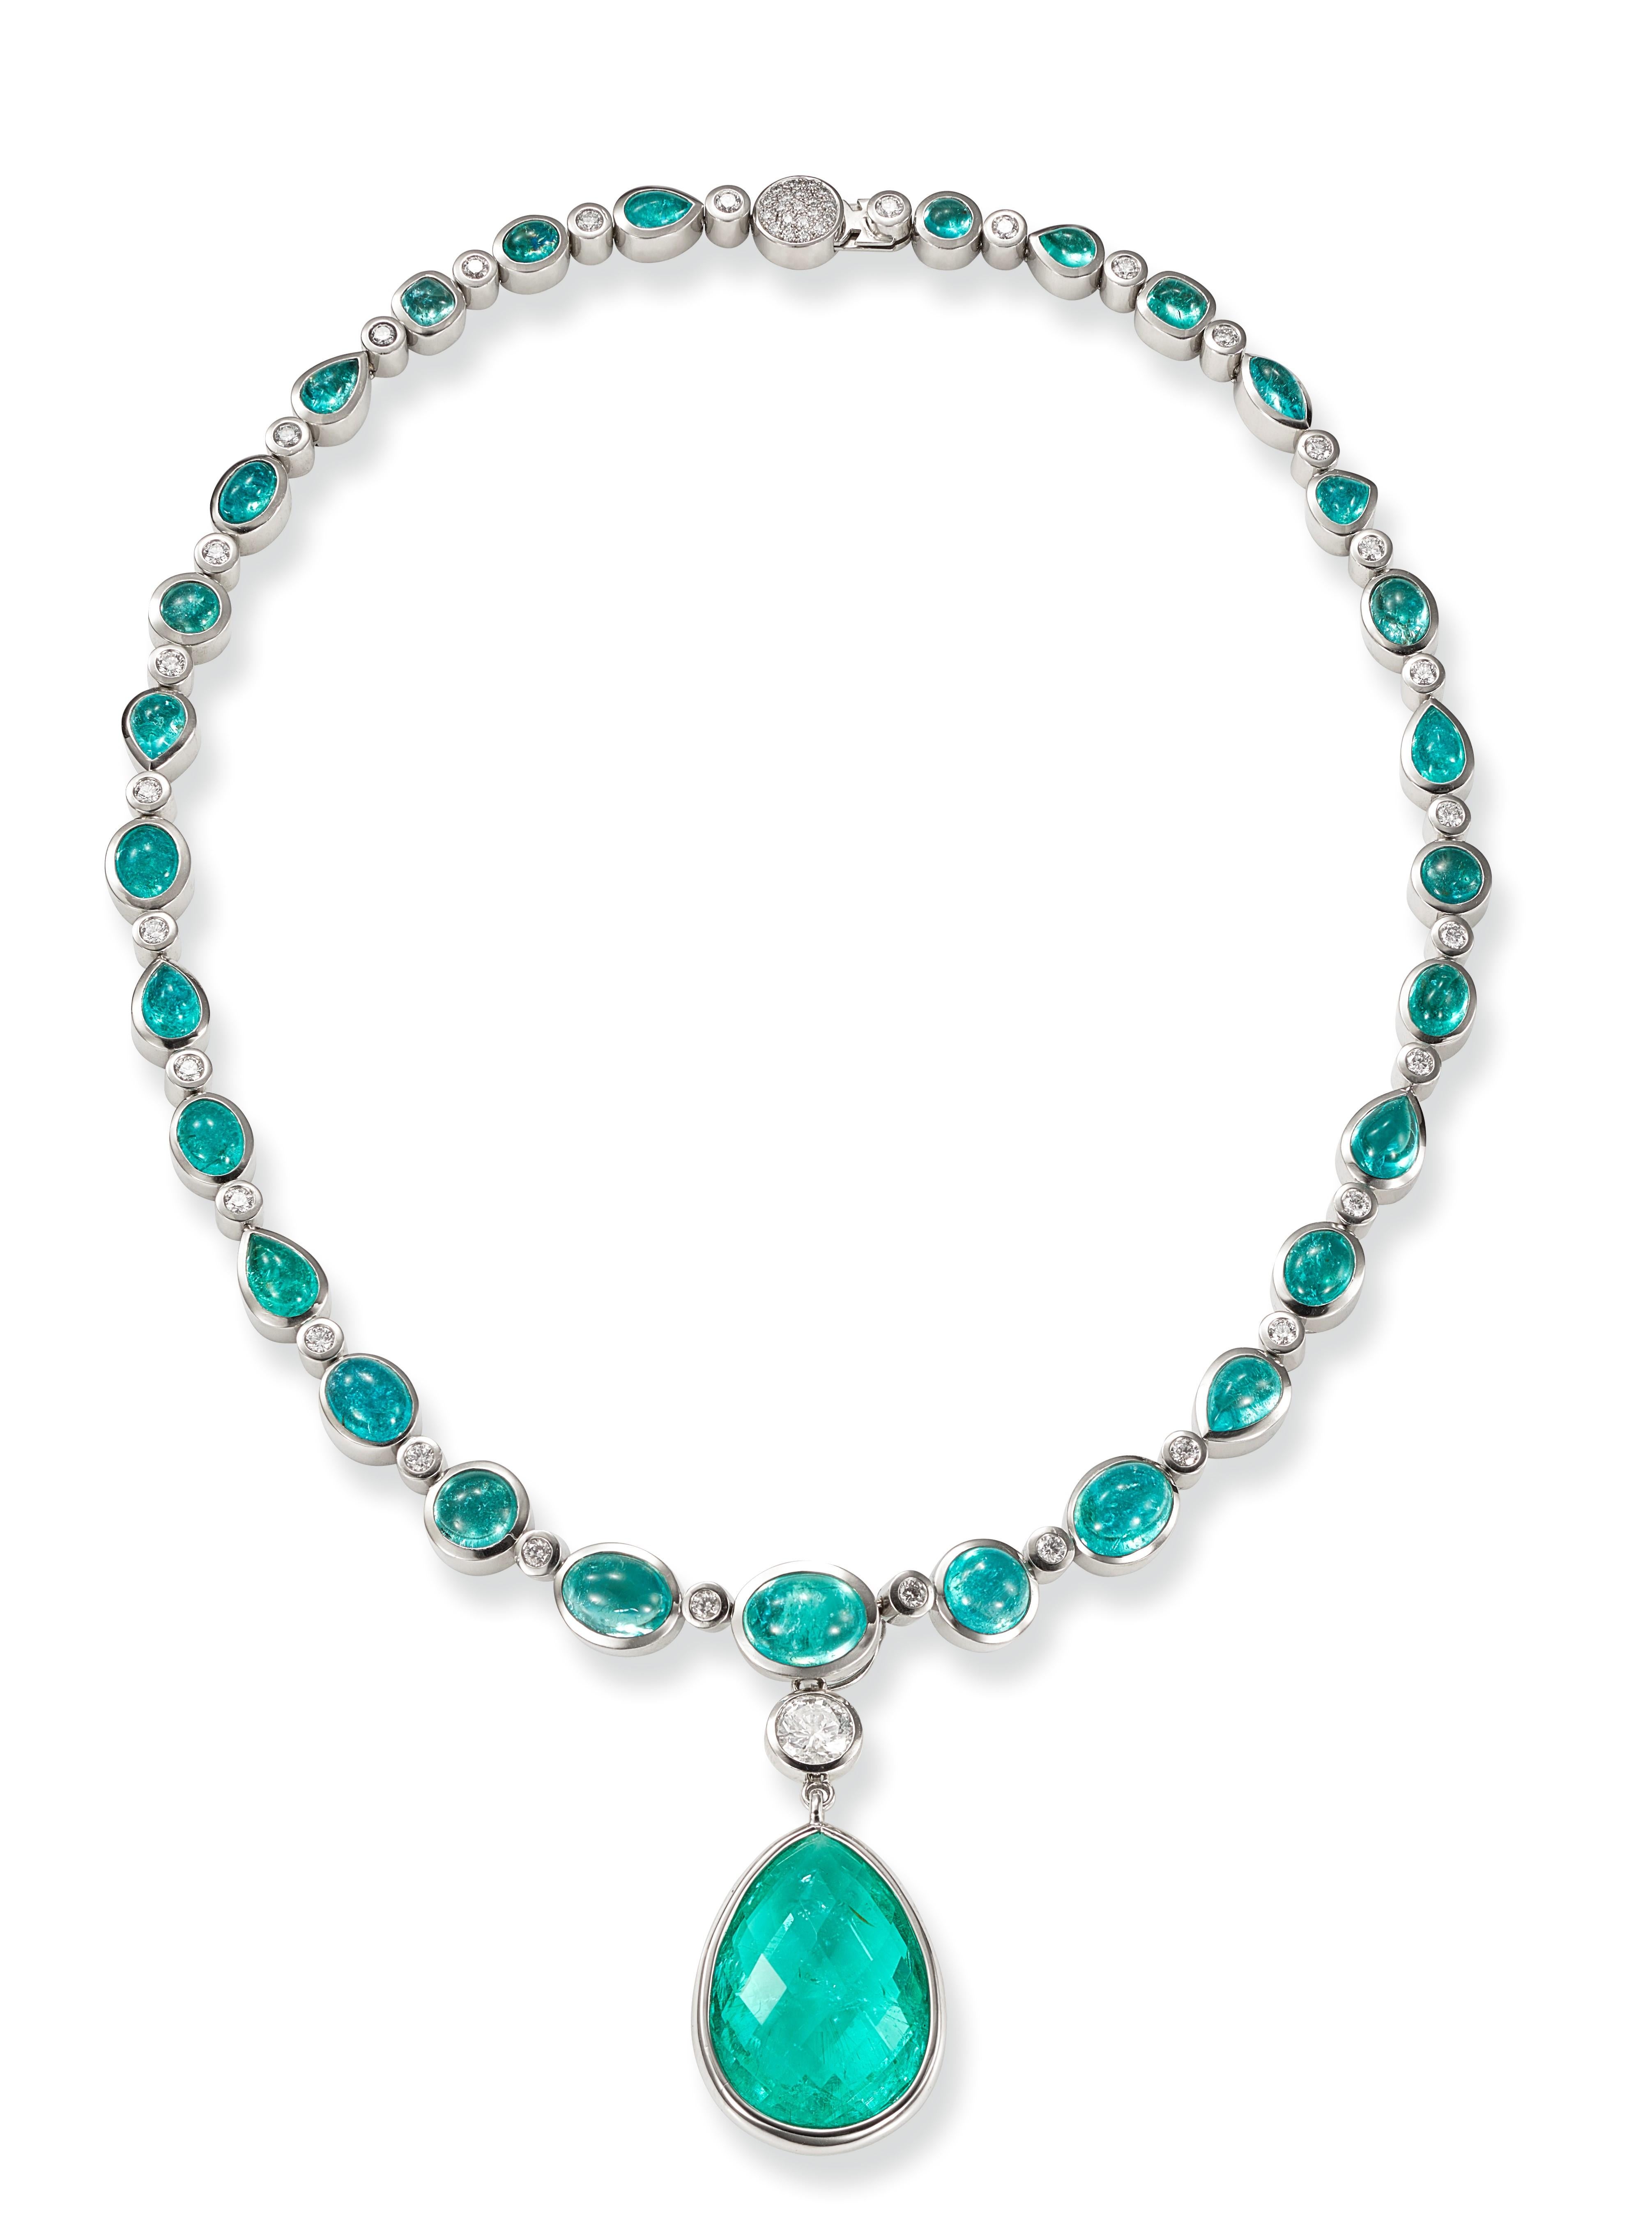 Necklace in Platinum with 29 Paraiba Tourmaline Cabouchons and 46 Diamonds 4